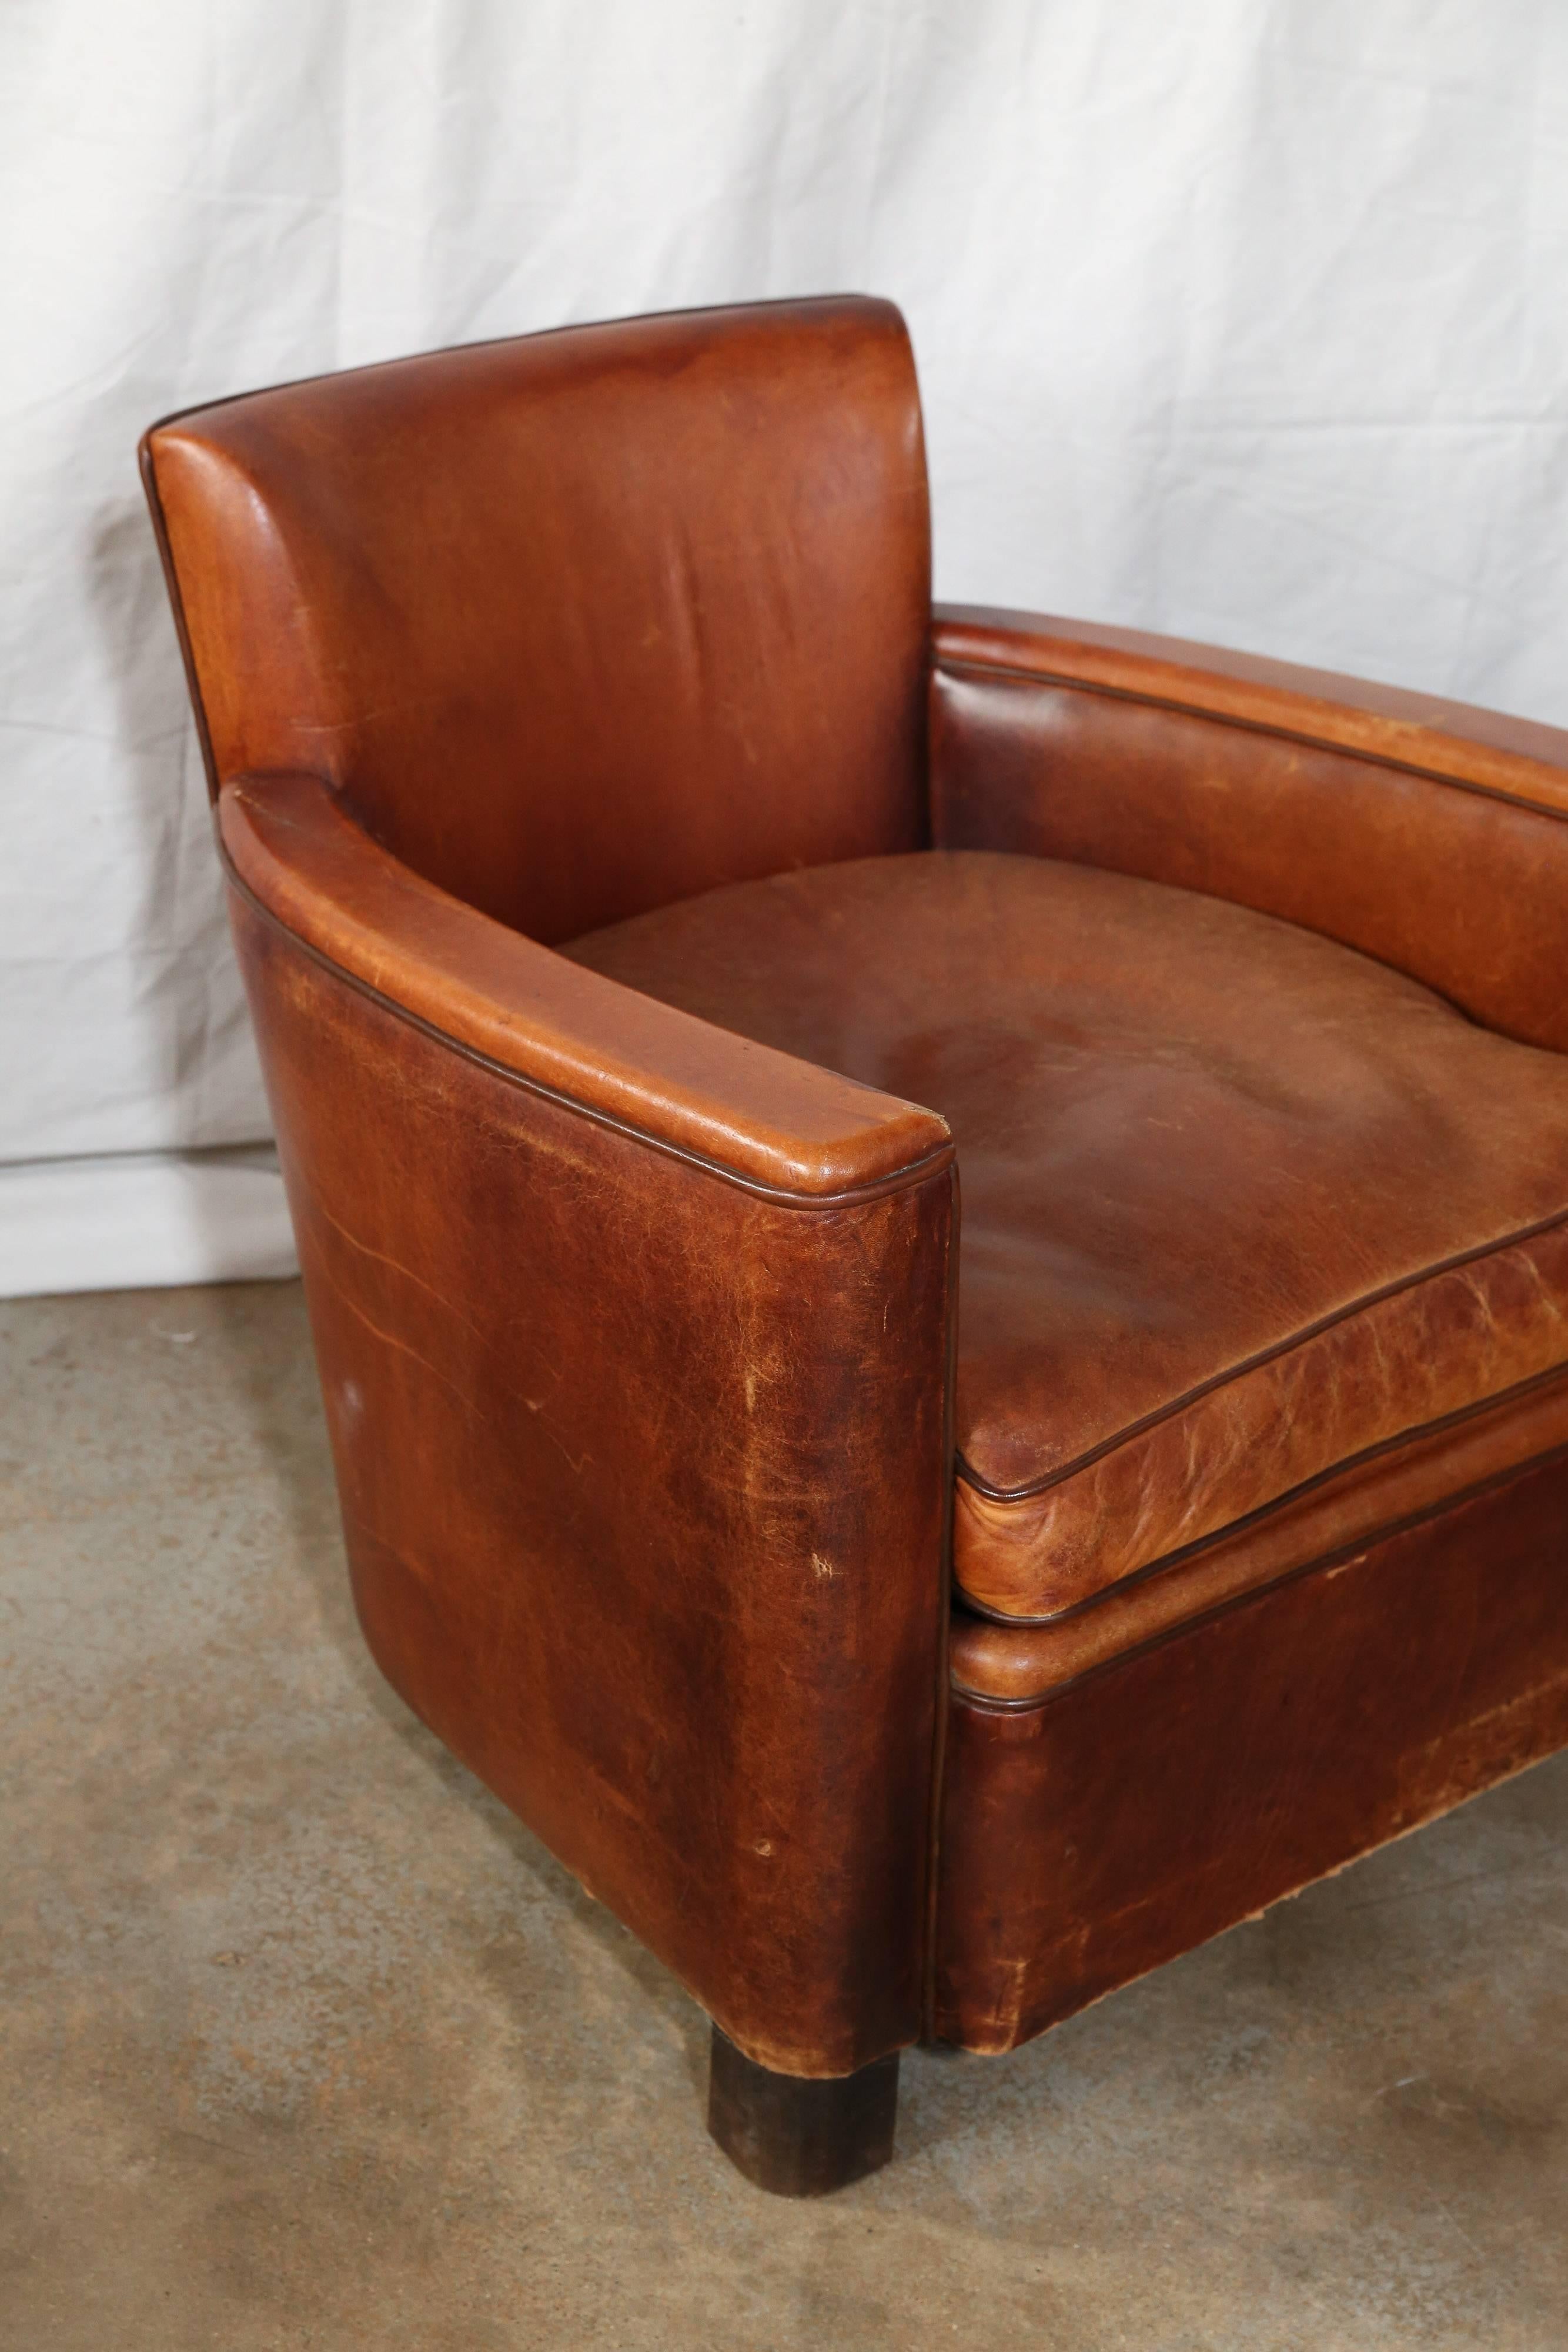 From France, leather club chairs in original cognac tone leather. Piped in a darker shade and finished with brass nailheads on back. With a Mid-Century look and chunky dark wood feet, the small-scale of these chairs adds to their appeal.